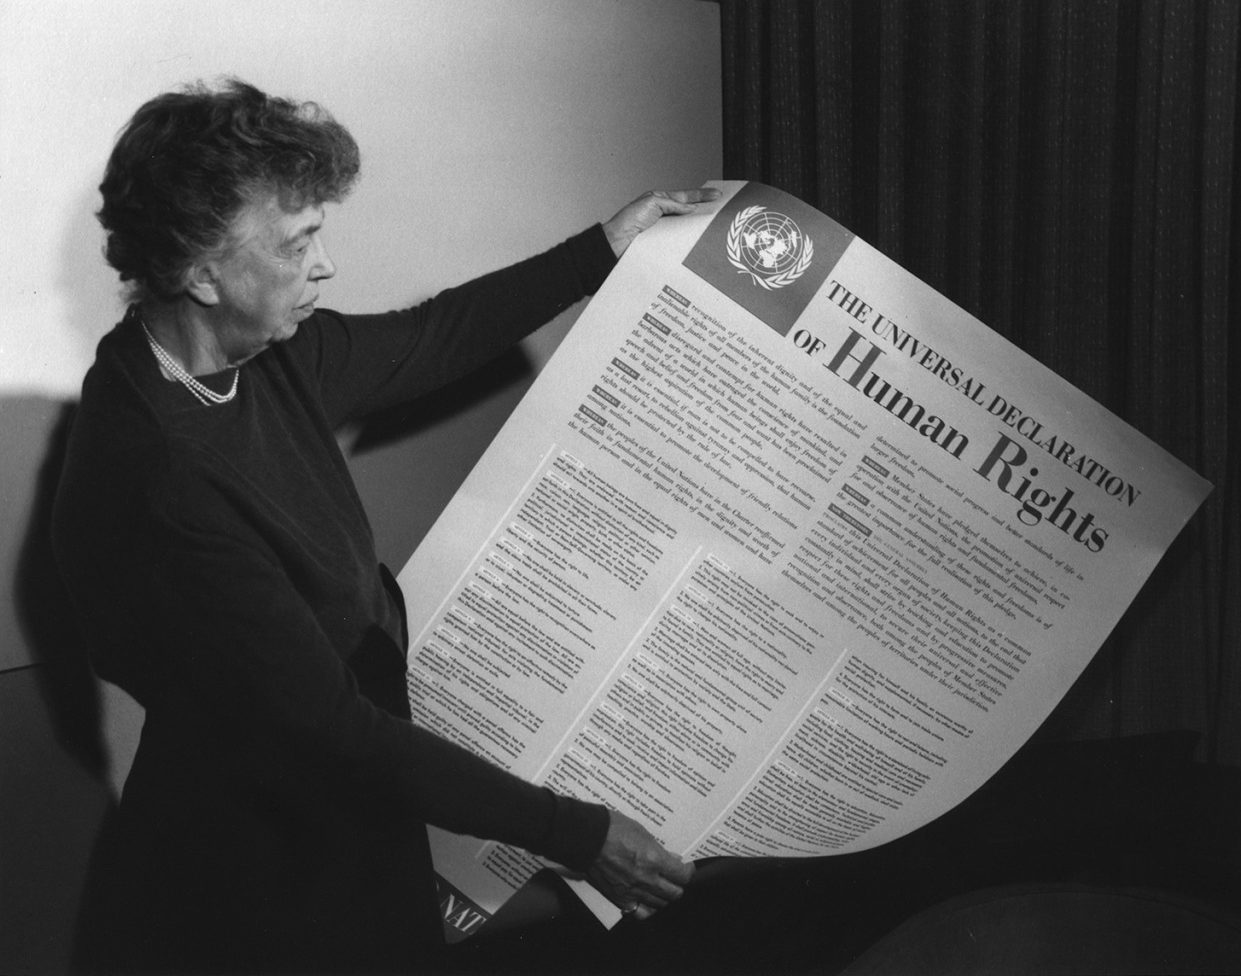 Looking Back at the Universal Declaration of Human Rights